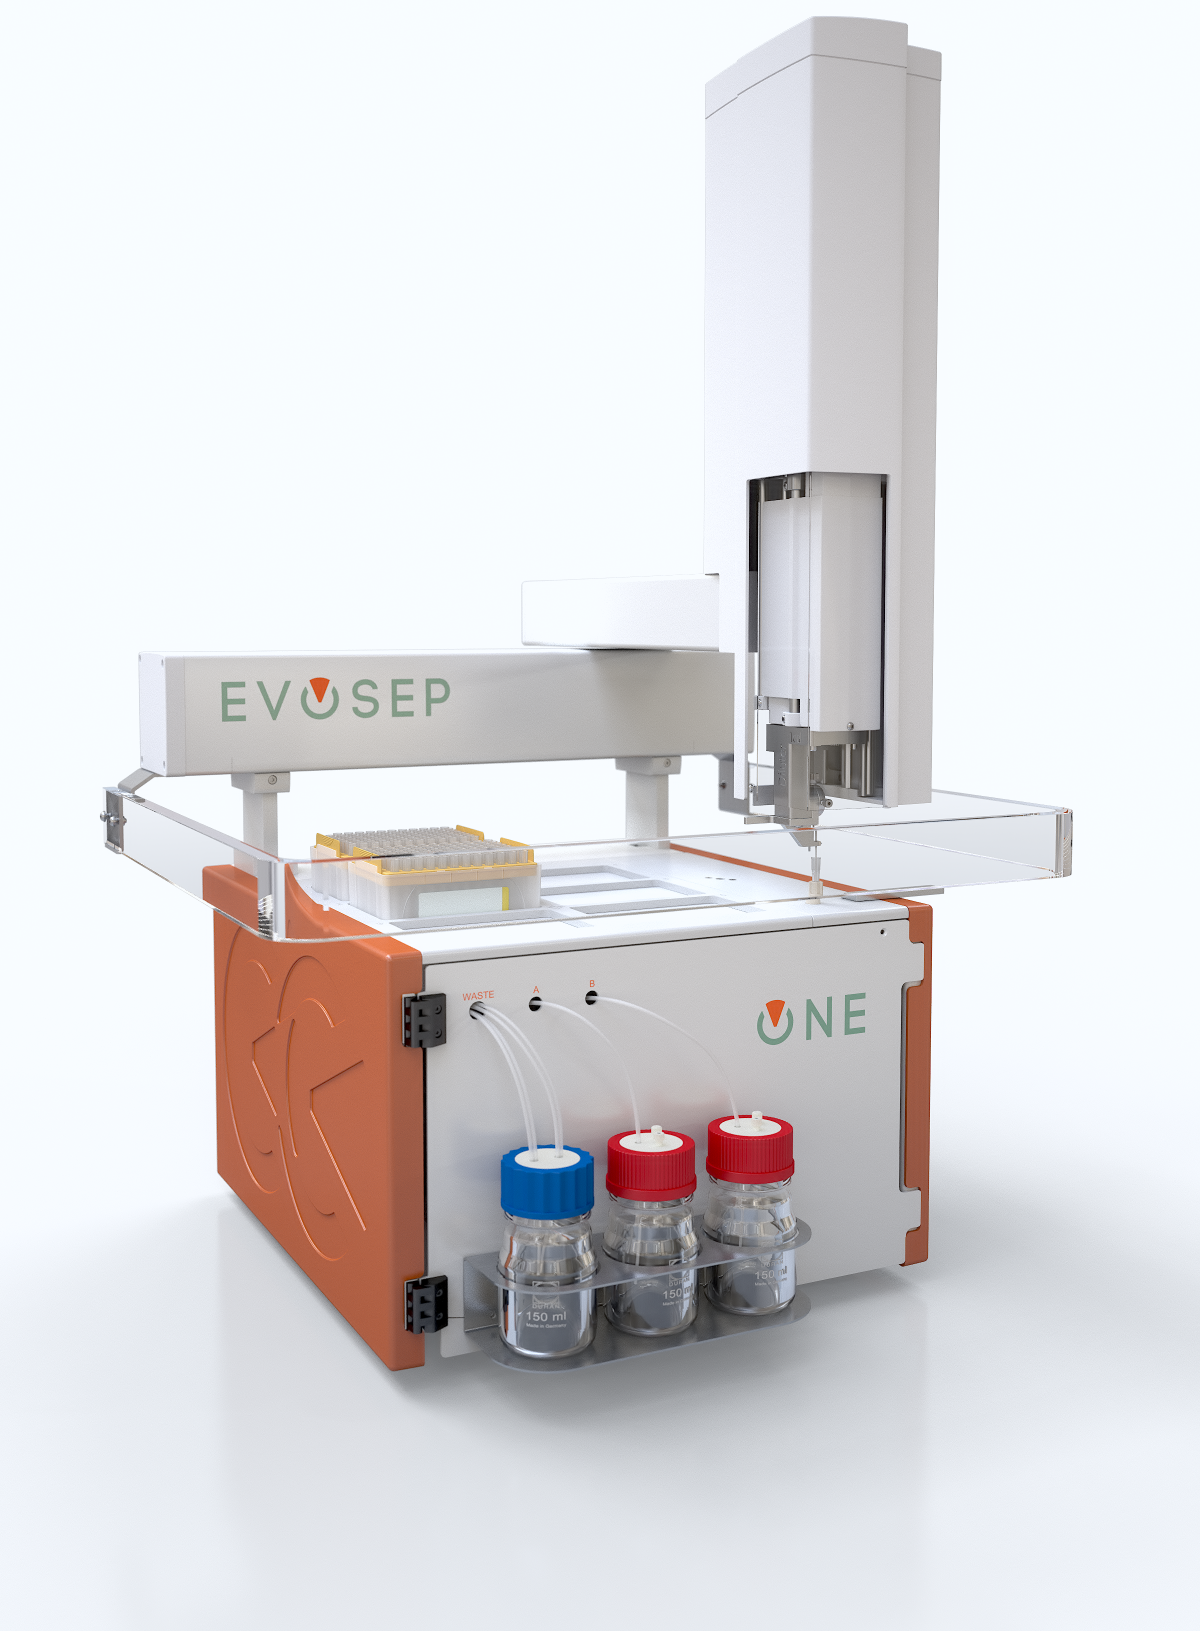 The Evosep One is a plug-and-play liquid chromatography platform built for standardization. It delivers a high level of speed and robustness, while still maintaining the sensitivity needed when performing clinical proteomics